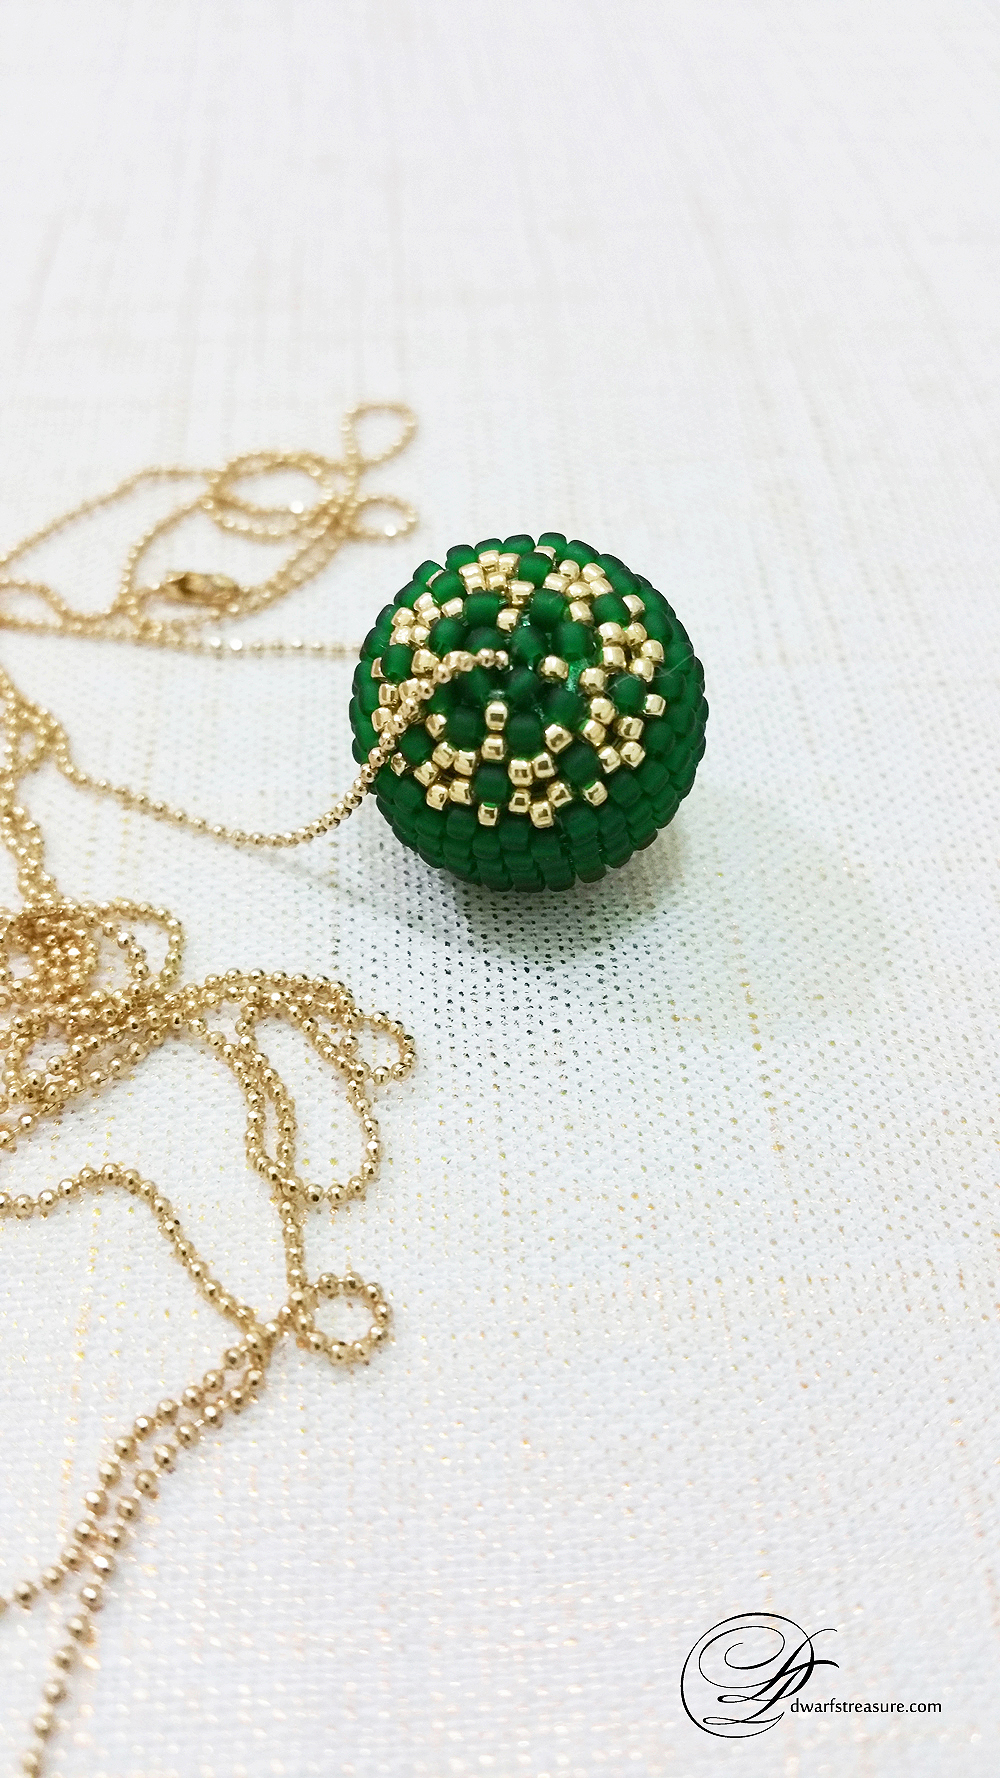 long ball chain necklace with graceful green and gold beaded ball pendant